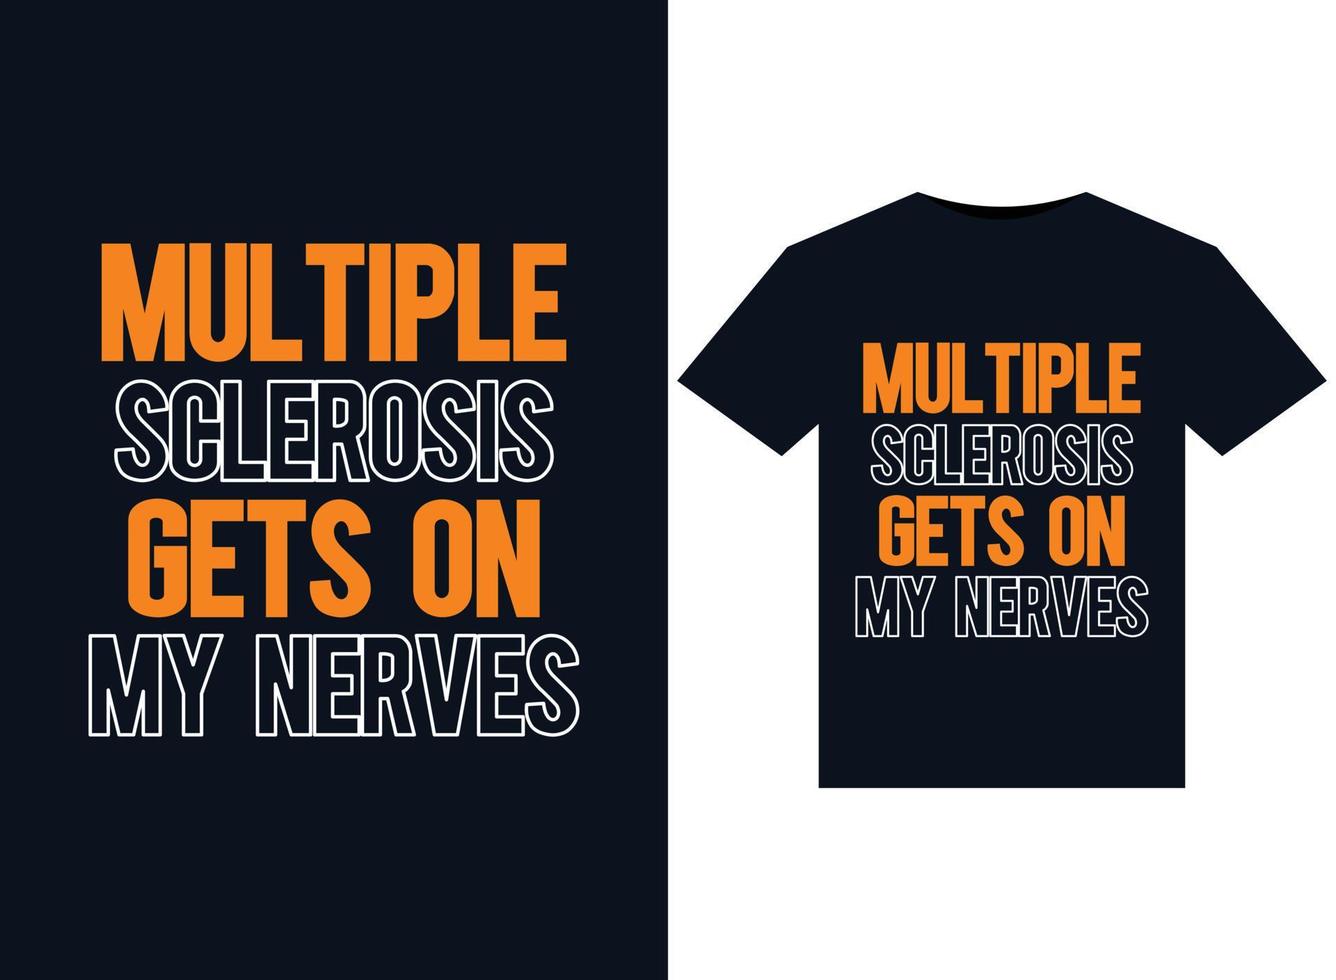 Multiple Sclerosis Gets on my Nerves illustrations for print-ready T-Shirts design vector